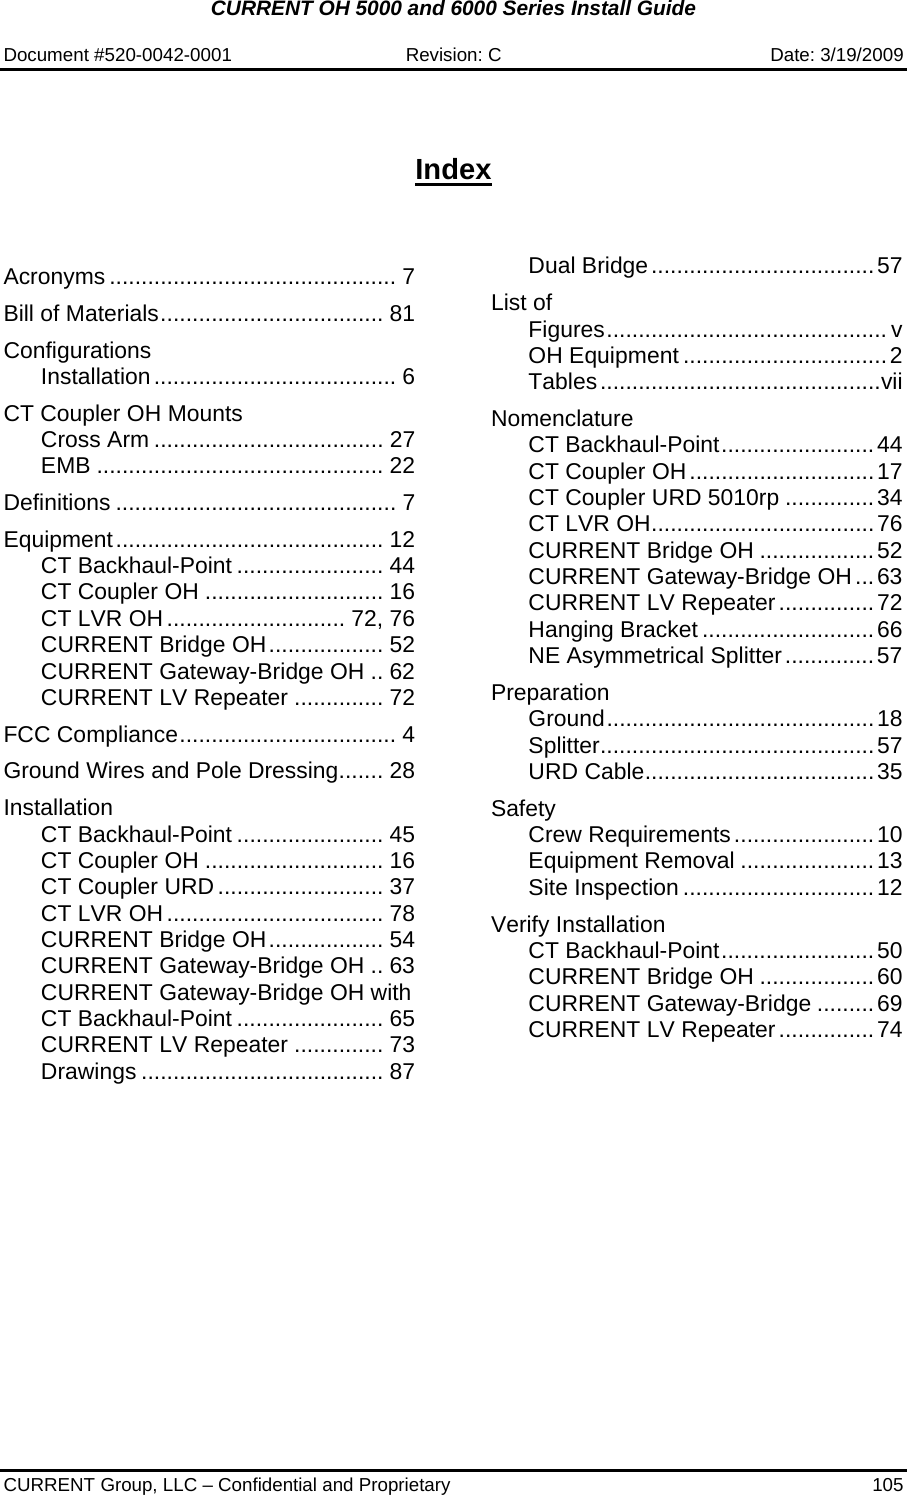 CURRENT OH 5000 and 6000 Series Install Guide  Document #520-0042-0001  Revision: C  Date: 3/19/2009  CURRENT Group, LLC – Confidential and Proprietary  105   Index   Acronyms ............................................. 7 Bill of Materials................................... 81 Configurations Installation...................................... 6 CT Coupler OH Mounts Cross Arm .................................... 27 EMB ............................................. 22 Definitions ............................................ 7 Equipment.......................................... 12 CT Backhaul-Point ....................... 44 CT Coupler OH ............................ 16 CT LVR OH............................ 72, 76 CURRENT Bridge OH.................. 52 CURRENT Gateway-Bridge OH .. 62 CURRENT LV Repeater .............. 72 FCC Compliance.................................. 4 Ground Wires and Pole Dressing....... 28 Installation CT Backhaul-Point ....................... 45 CT Coupler OH ............................ 16 CT Coupler URD .......................... 37 CT LVR OH.................................. 78 CURRENT Bridge OH.................. 54 CURRENT Gateway-Bridge OH .. 63 CURRENT Gateway-Bridge OH with CT Backhaul-Point ....................... 65 CURRENT LV Repeater .............. 73 Drawings ...................................... 87 Dual Bridge...................................57 List of Figures............................................ v OH Equipment ................................2 Tables............................................vii Nomenclature CT Backhaul-Point........................44 CT Coupler OH.............................17 CT Coupler URD 5010rp ..............34 CT LVR OH...................................76 CURRENT Bridge OH ..................52 CURRENT Gateway-Bridge OH...63 CURRENT LV Repeater...............72 Hanging Bracket ...........................66 NE Asymmetrical Splitter..............57 Preparation Ground..........................................18 Splitter...........................................57 URD Cable....................................35 Safety Crew Requirements......................10 Equipment Removal .....................13 Site Inspection ..............................12 Verify Installation CT Backhaul-Point........................50 CURRENT Bridge OH ..................60 CURRENT Gateway-Bridge .........69 CURRENT LV Repeater...............74    